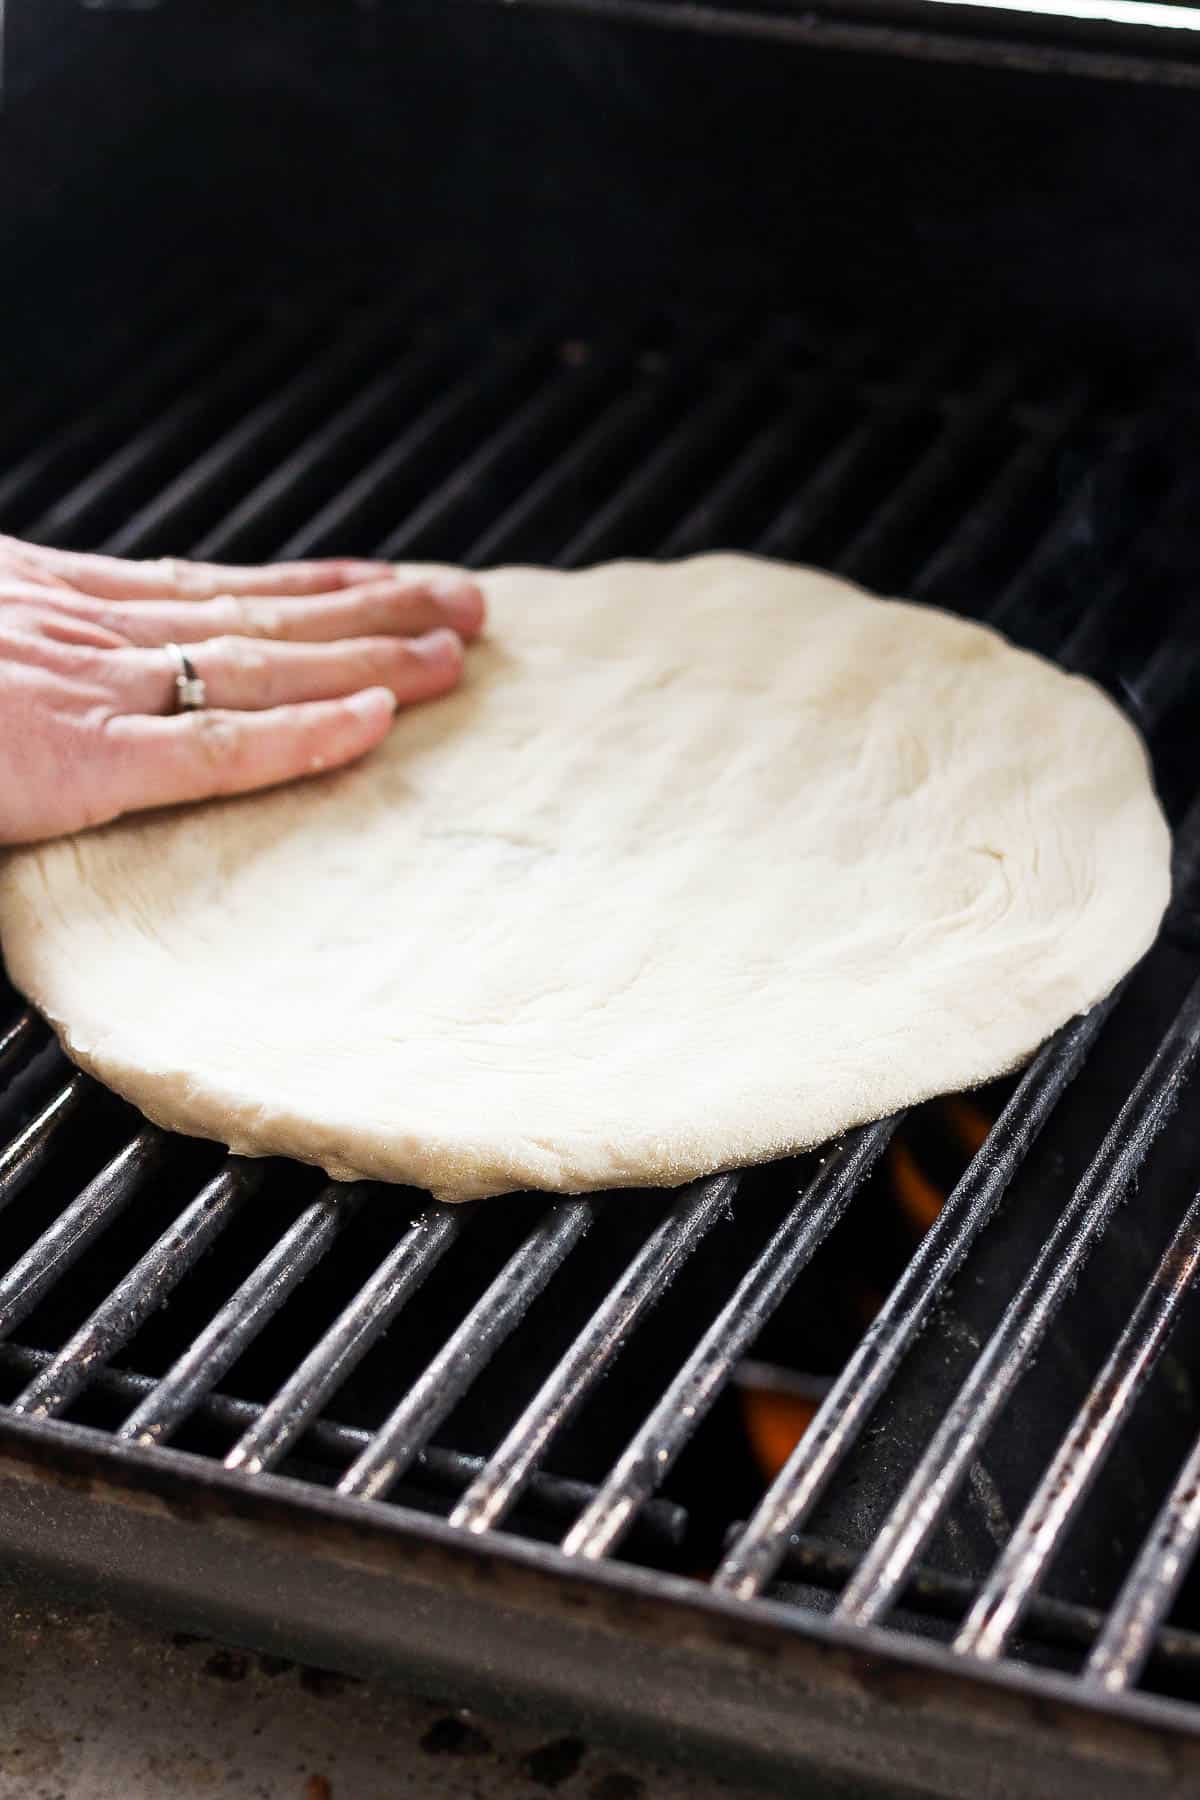 A portion of pizza dough on the grill grates.